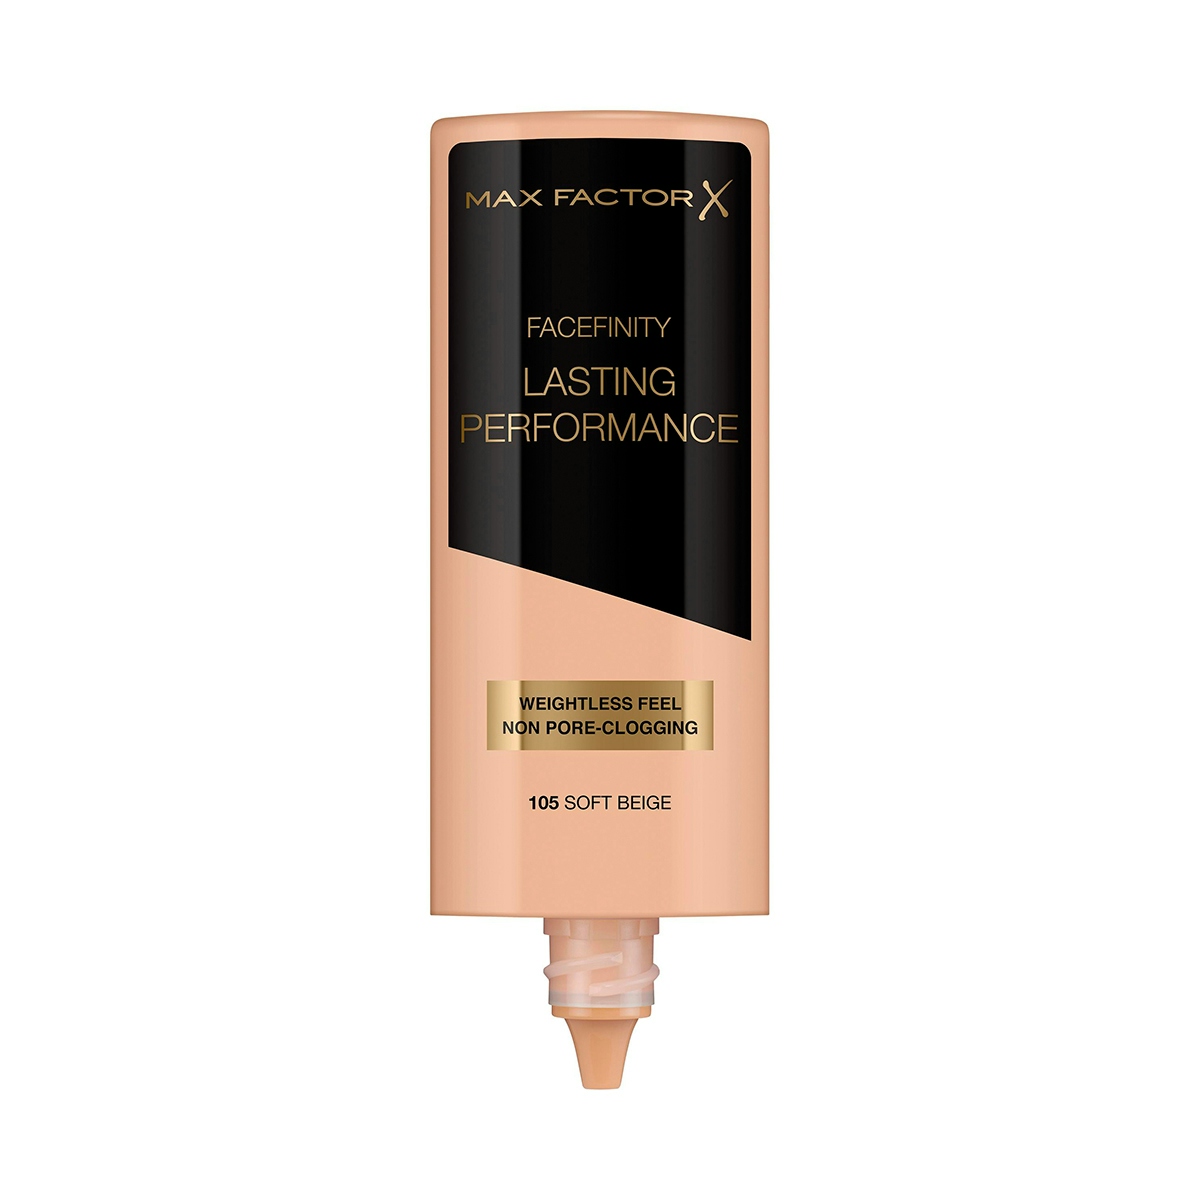 Base de Maquillaje Facefinity Lasting Performance Max Factor